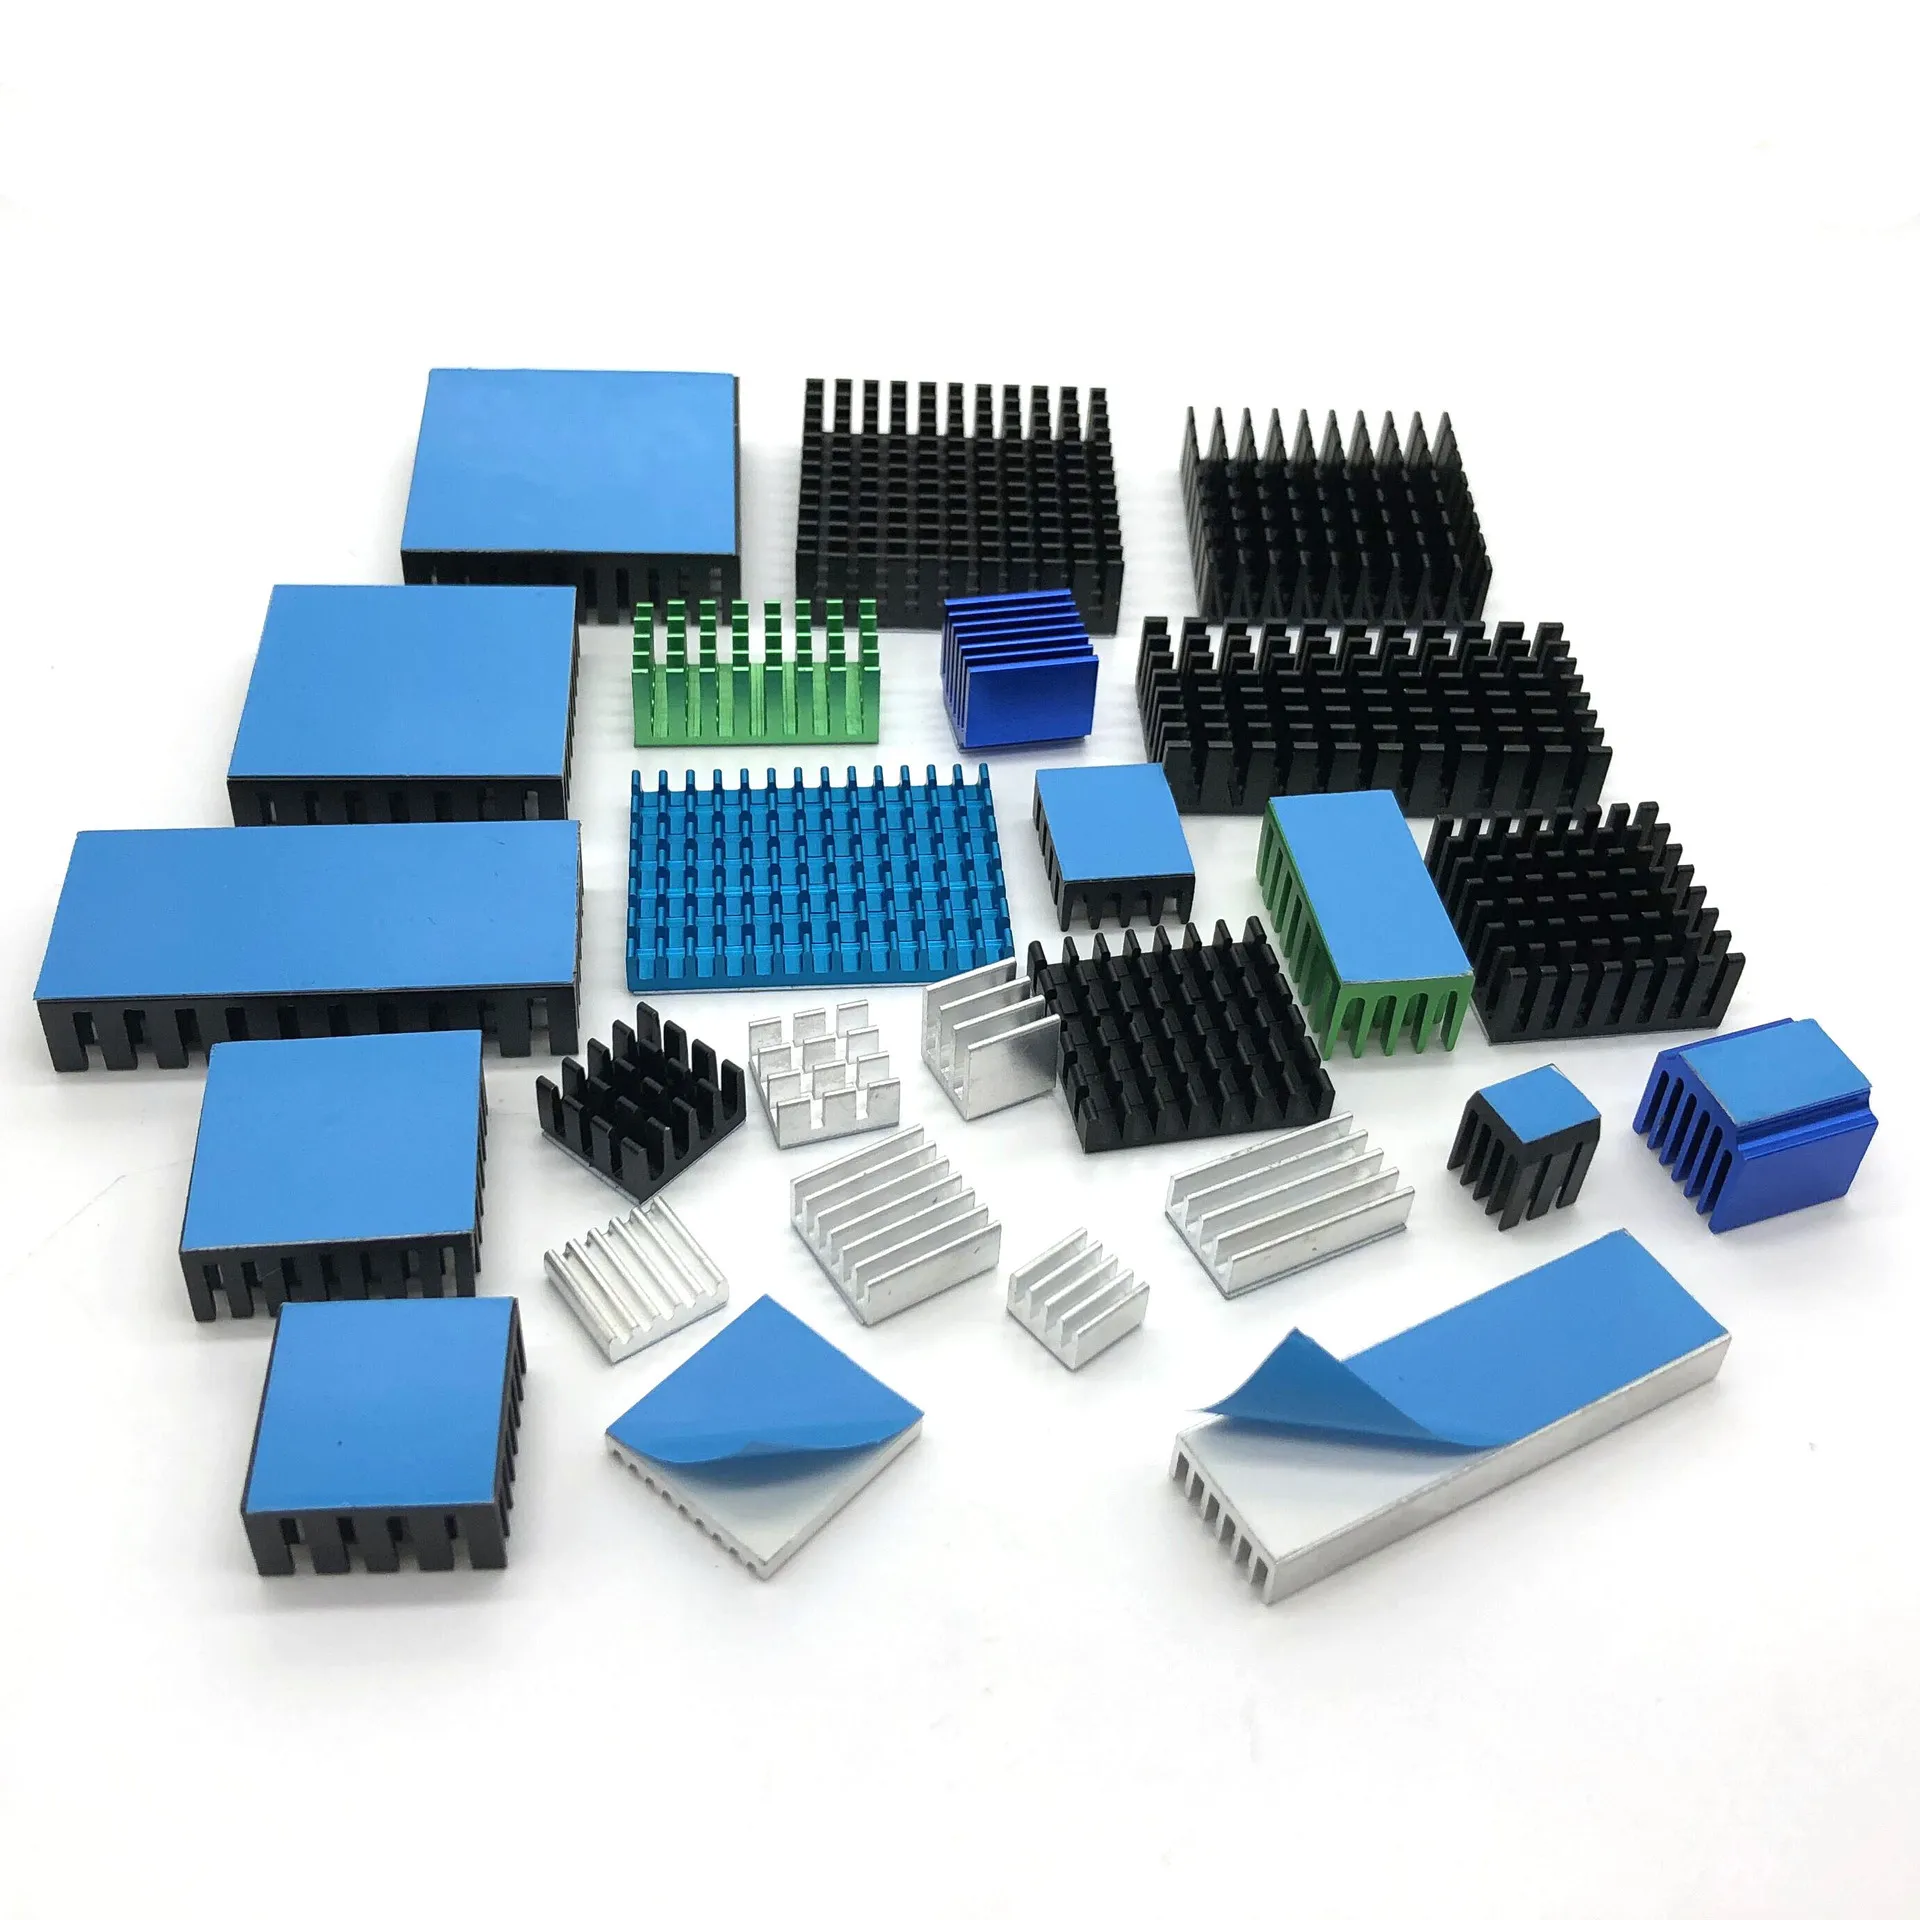 

In stock heatsink radiator Industrial Anodized Extruded Aluminum Profile Heat sink for electronic chip motherboard aclidinium